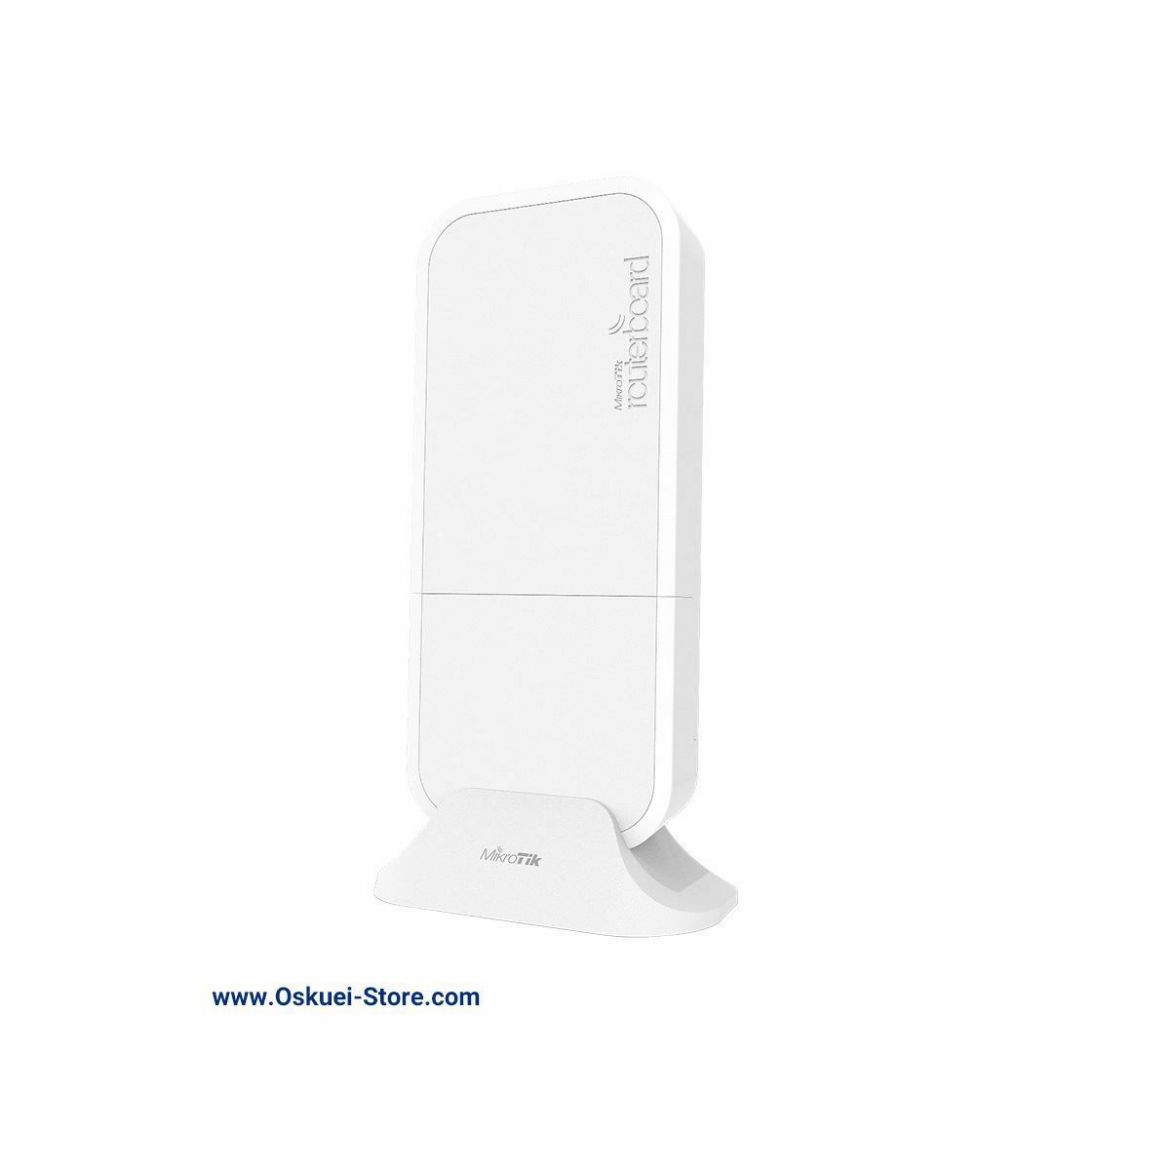 MikroTik RBwAPG-60ad-SA Wireless Router Right With Stand